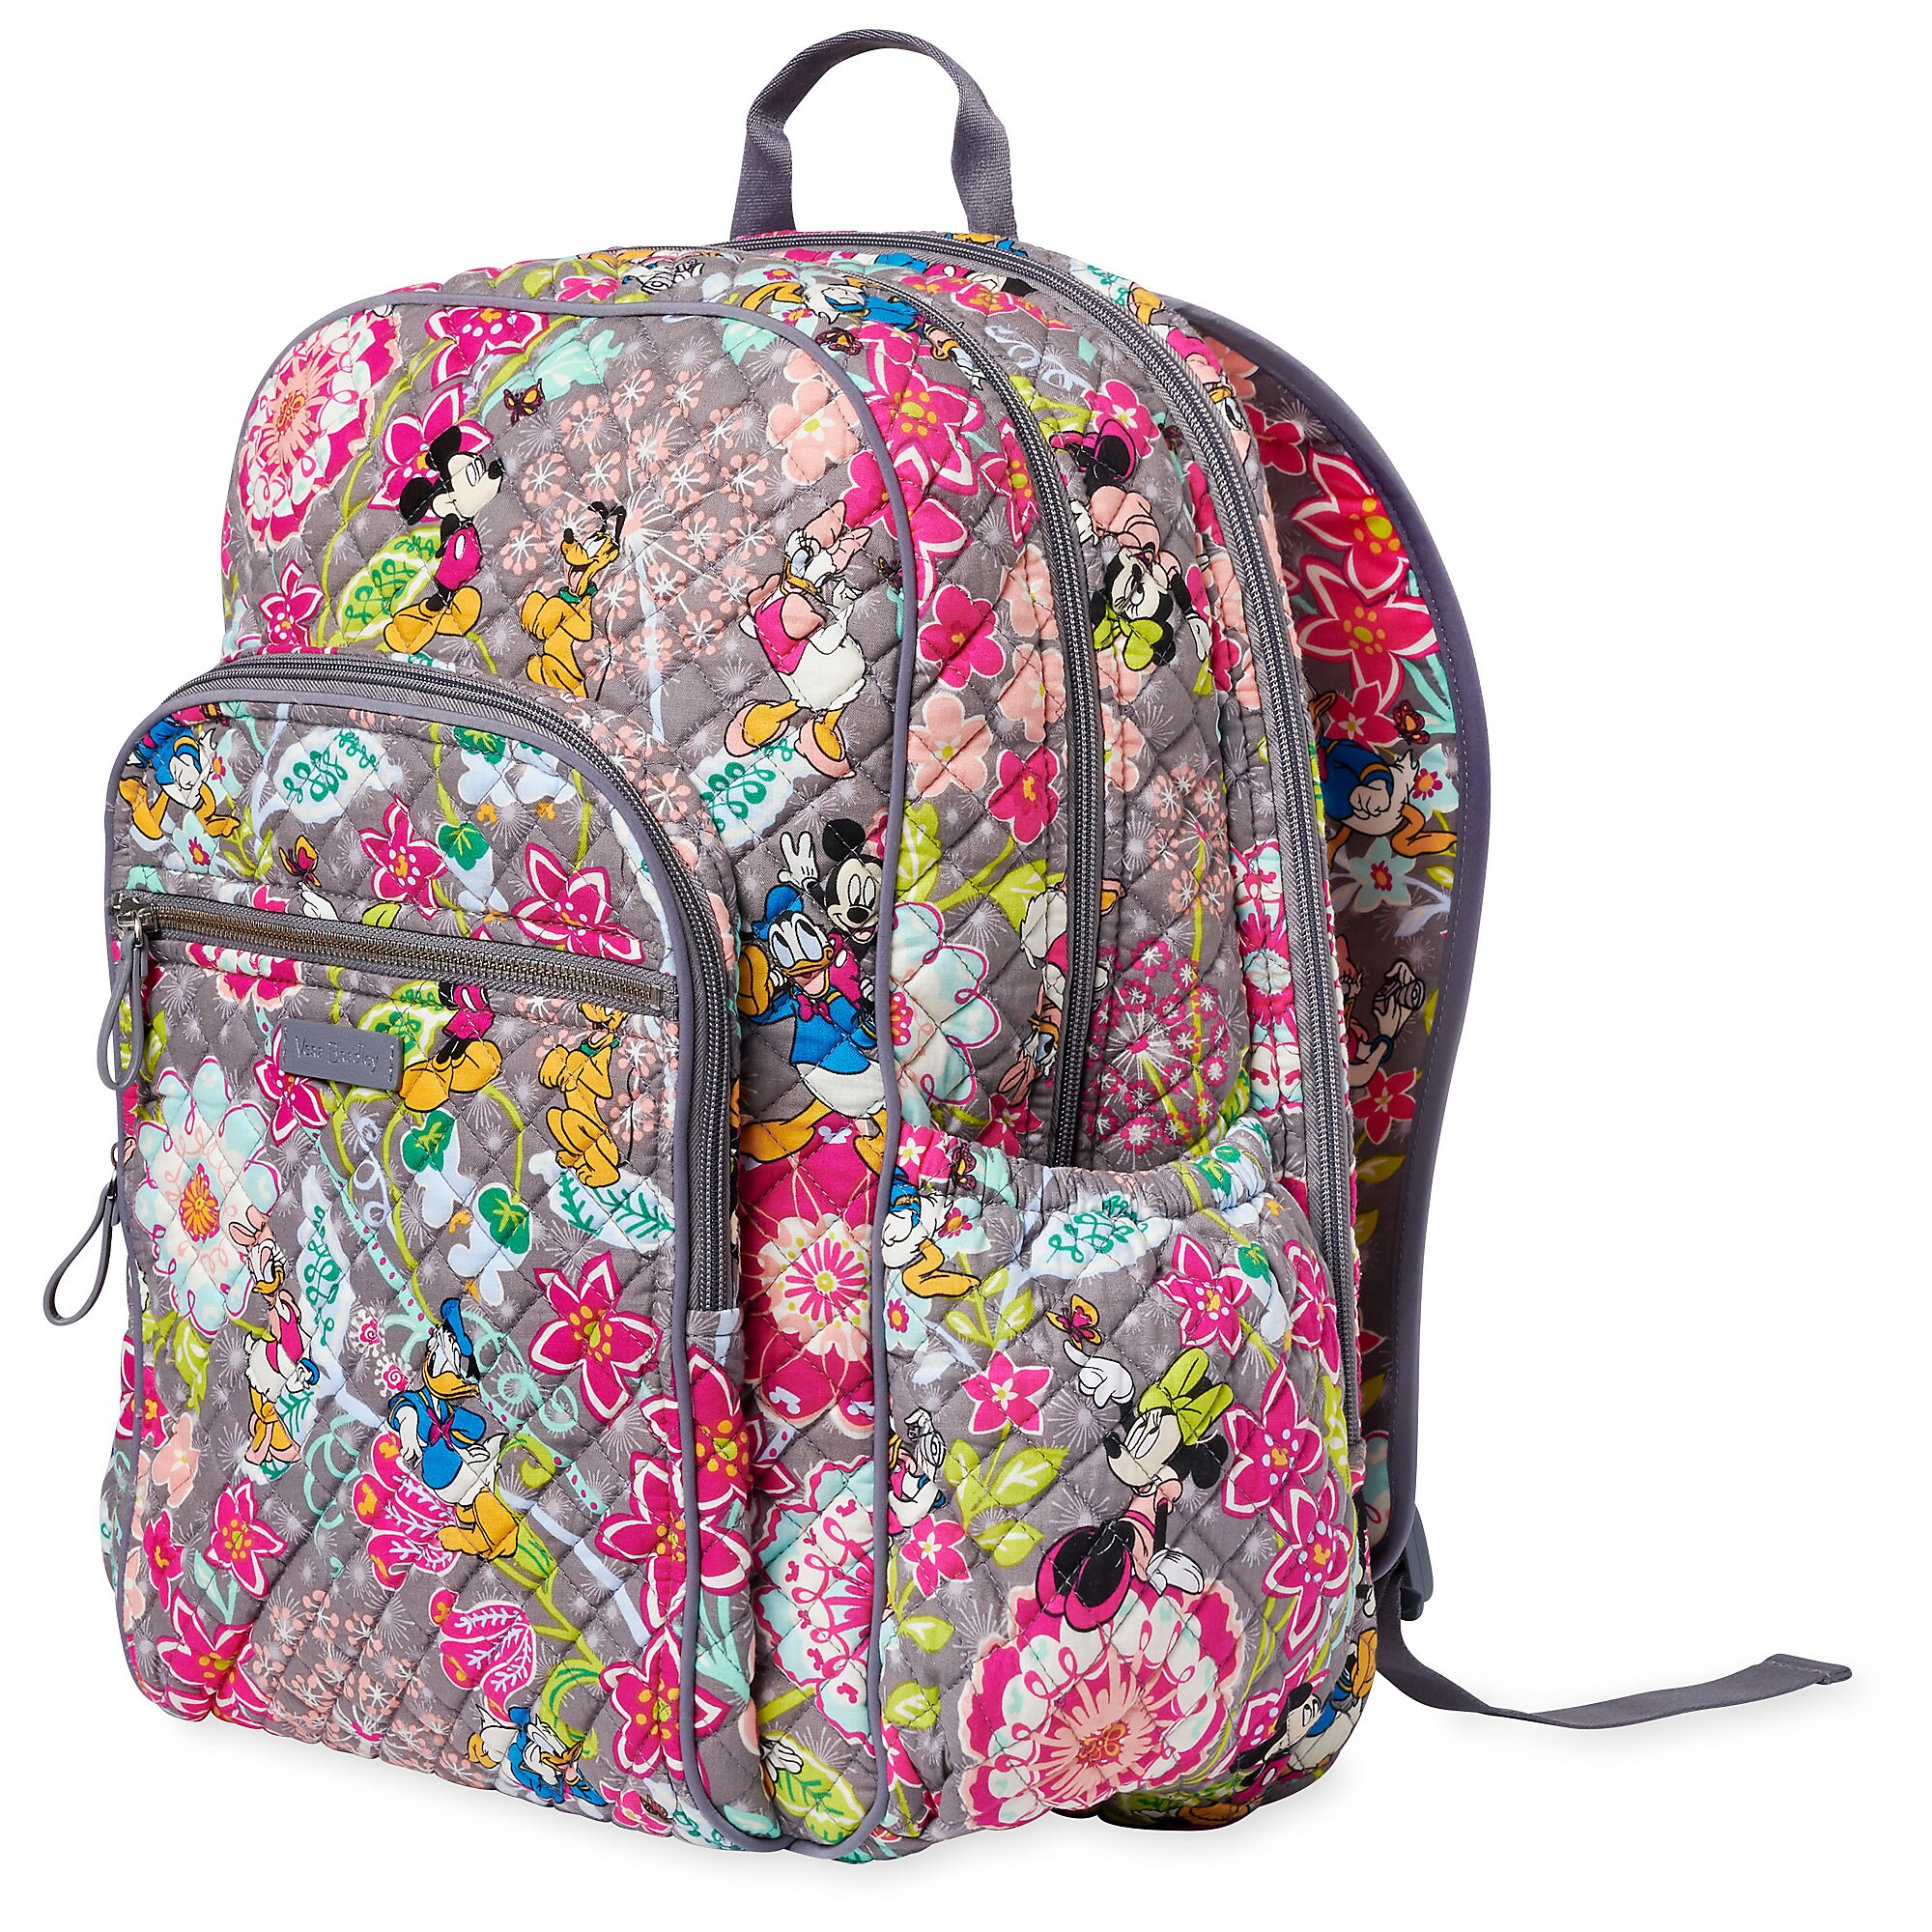 Mickey Mouse and Friends Campus Backpack by Vera Bradley was released today â Dis Merchandise News